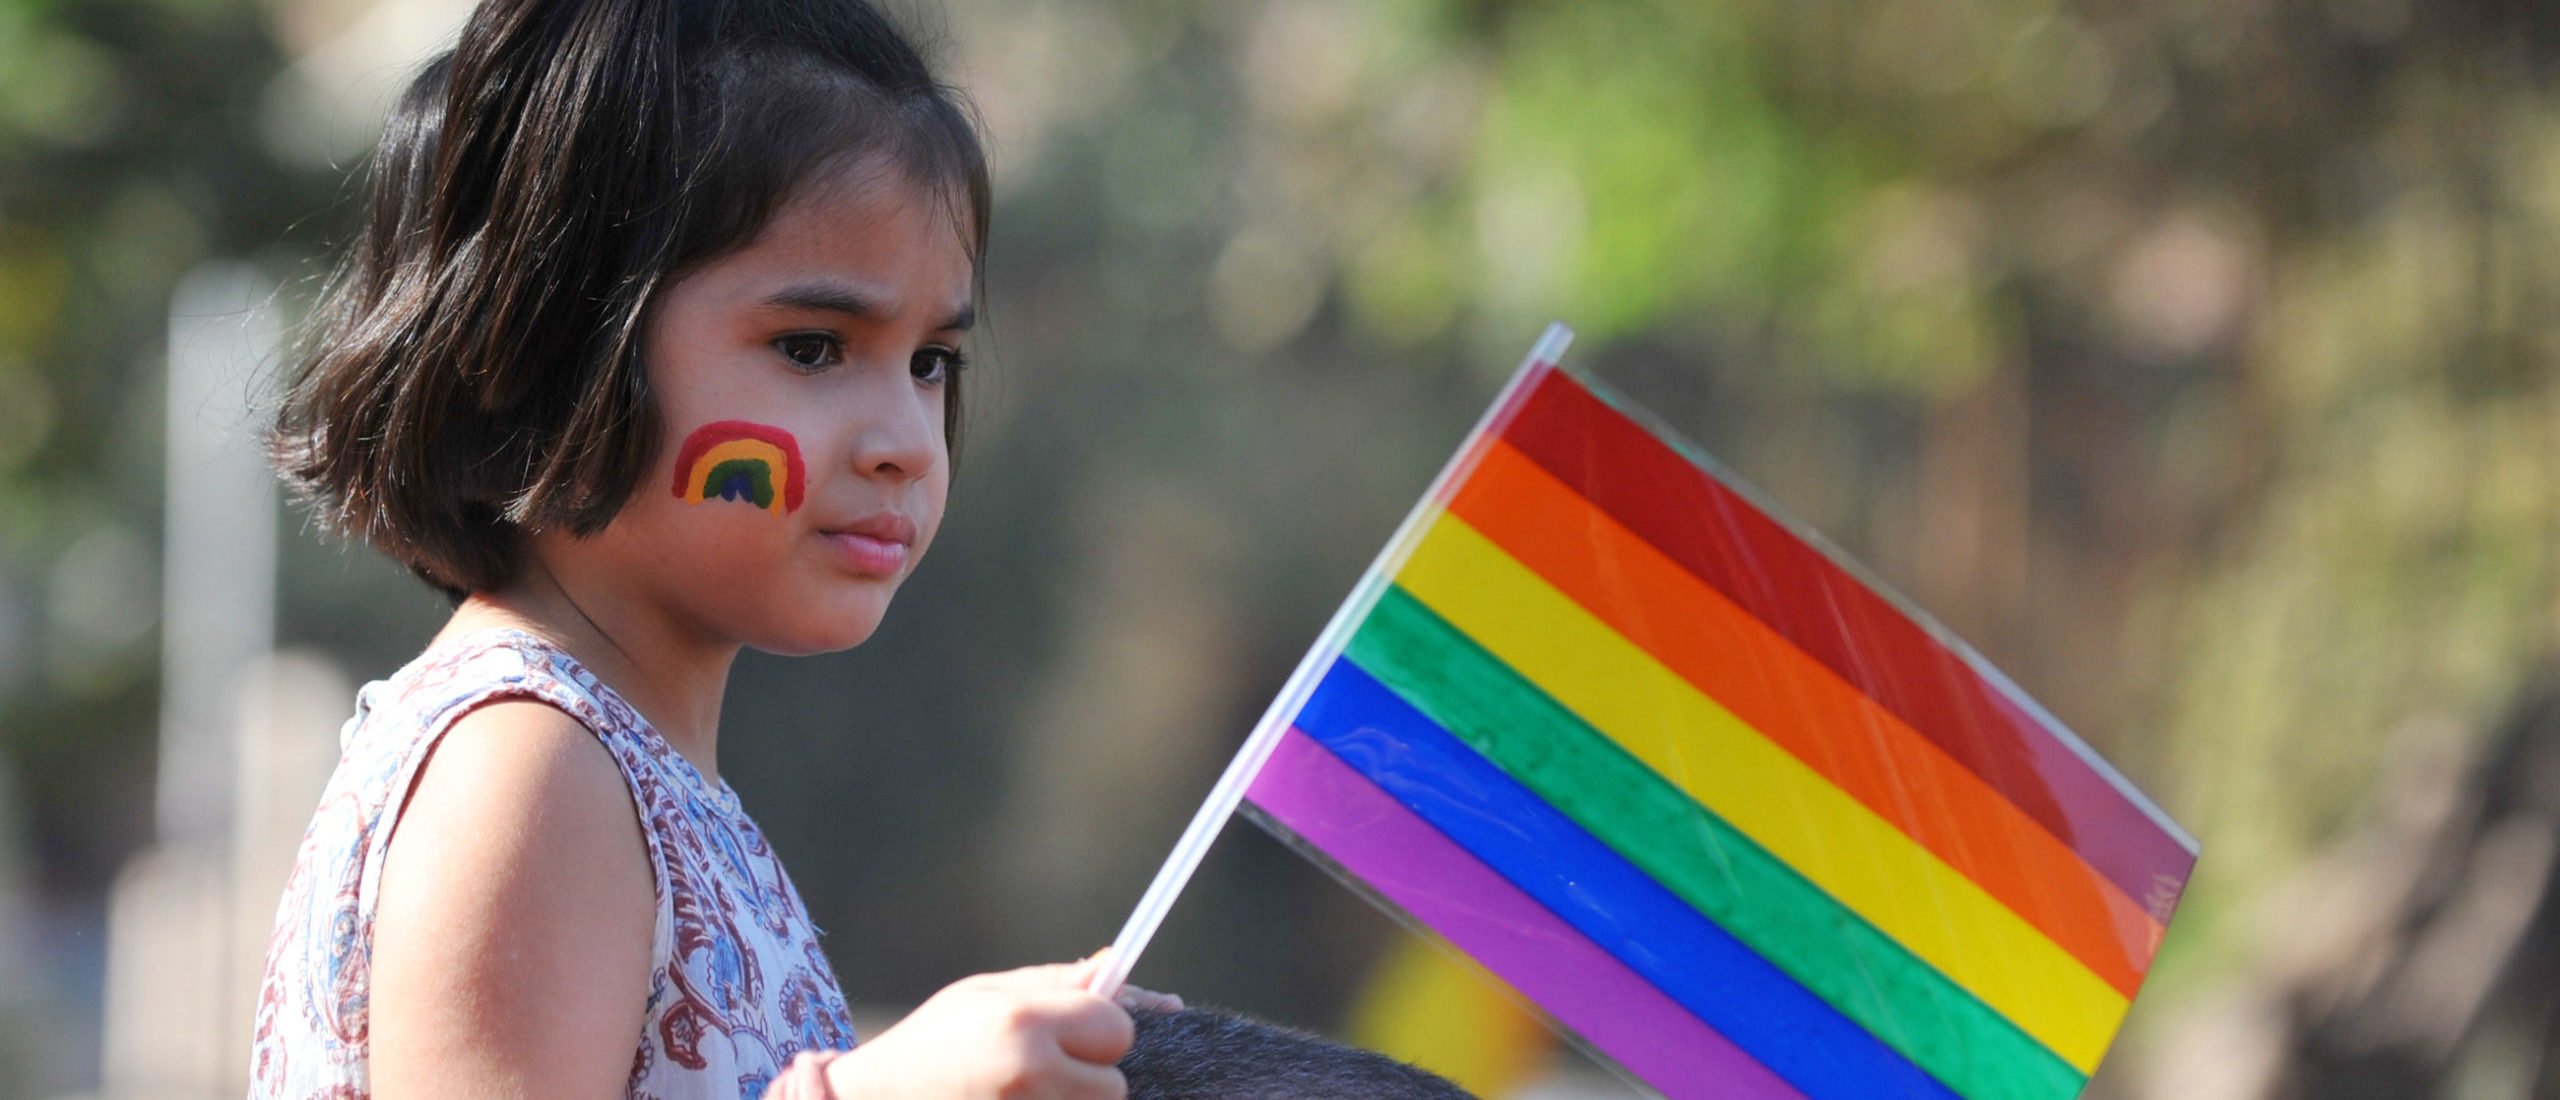 A girl looks on during the "Queer Azadi March" freedom march for lesbian, gay, bisexual and transgender supporters, in Mumbai on January 29, 2011. (Photo by SAJJAD HUSSAIN/AFP via Getty Images)